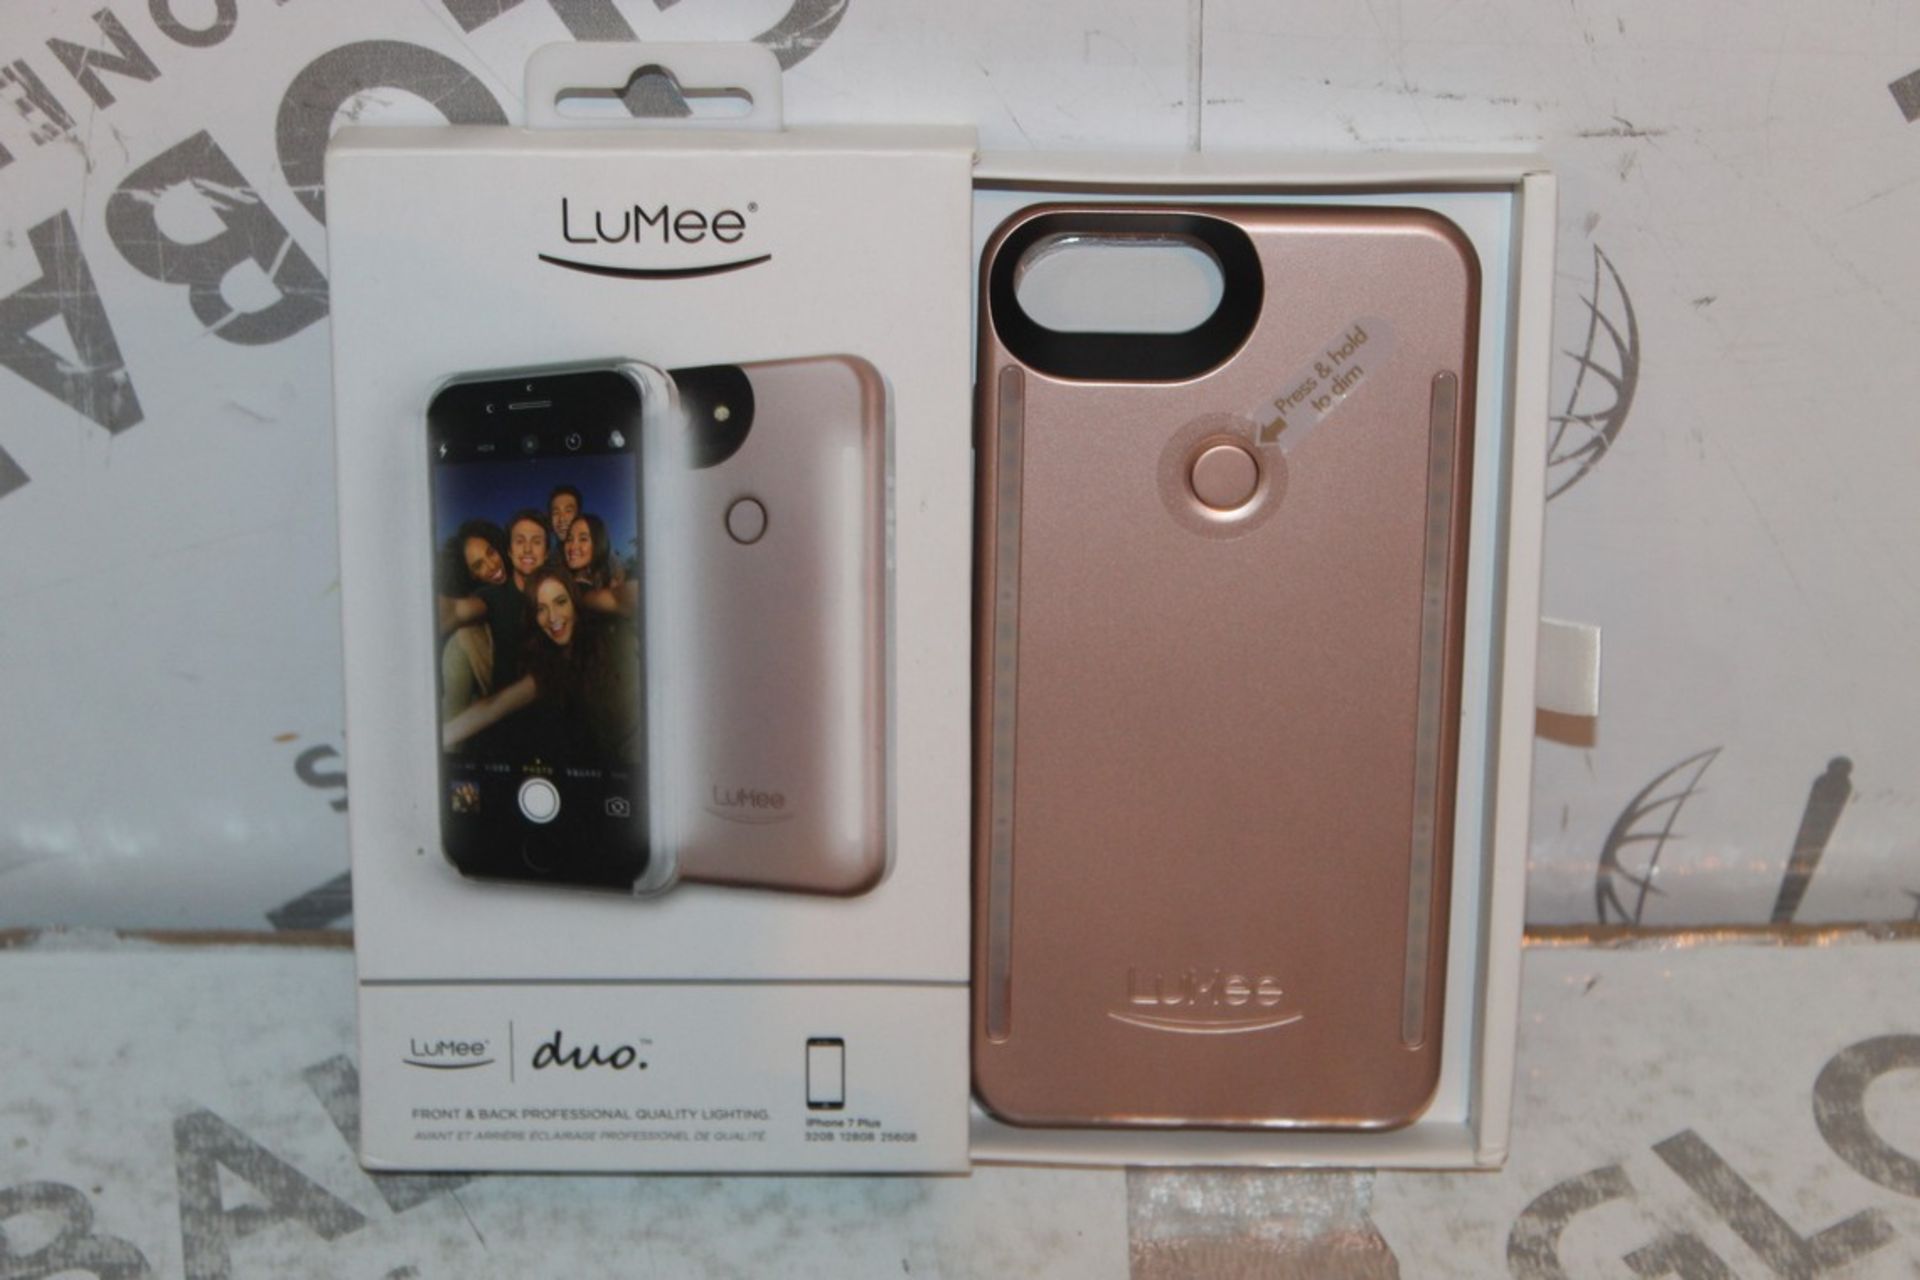 2 Boxed Lummee Iphone 7 & 7 Plus Front & Back Professional Lighting Cases Combined RRP £100